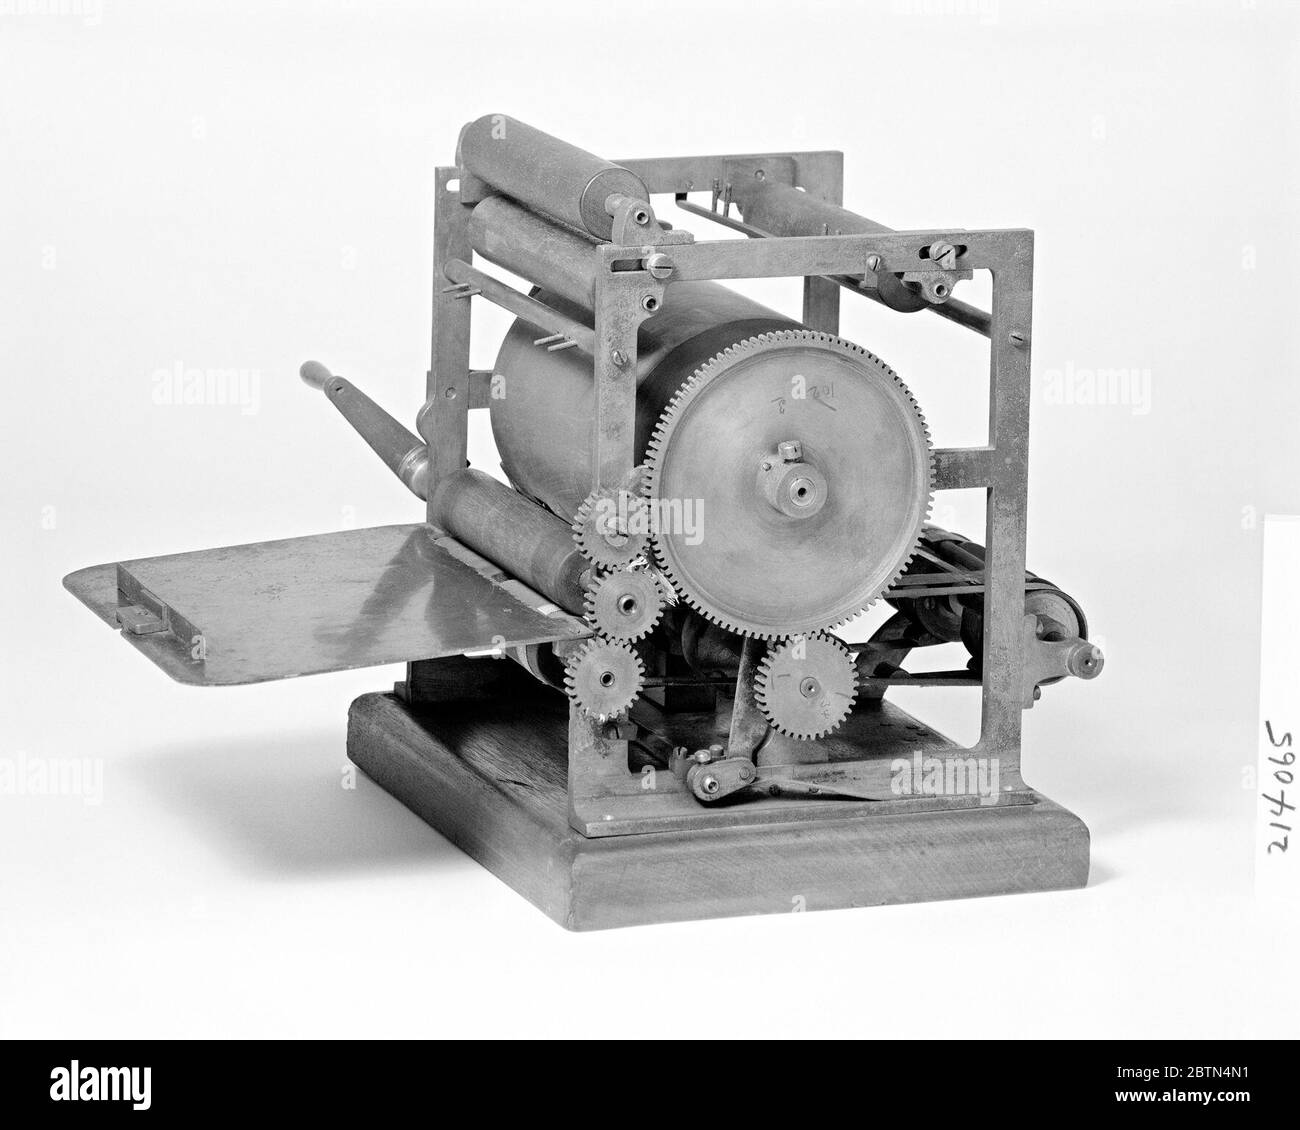 Patent Model of a Sheetreversing Apparatus for Printing Machines. This patent model demonstrates an invention for a sheet-reversing apparatus which was granted patent number 214065. On a sheet-fed rotary press like Hoe's Type Revolving Press, an apparatus to turn each sheet for printing on the reverse side.Currently not on view Stock Photo